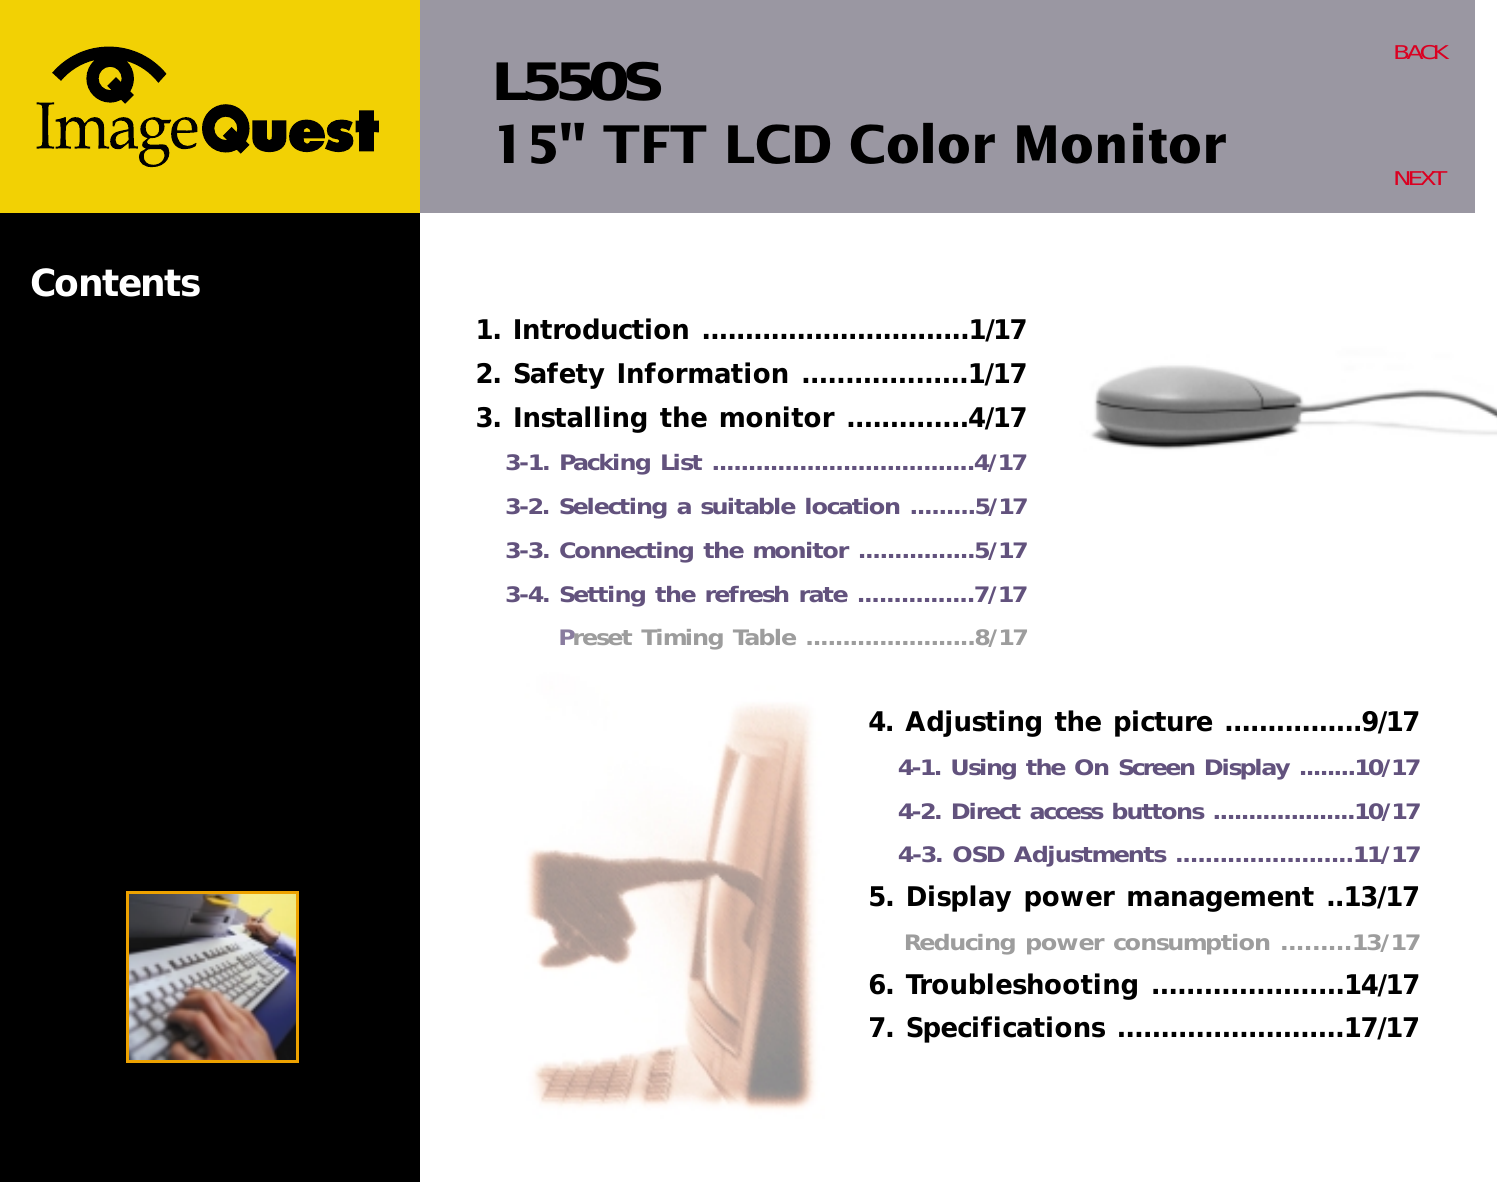 L550S15&quot; TFT LCD Color MonitorBACKNEXTContents4. Adjusting the picture ................9/174-1. Using the On Screen Display ........10/174-2. Direct access buttons ....................10/174-3. OSD Adjustments ........................11/175. Display power management ..13/17Reducing power consumption .........13/176. Troubleshooting ......................14/177. Specifications ..........................17/171. Introduction ...............................1/172. Safety Information ...................1/173. Installing the monitor ..............4/173-1. Packing List ....................................4/173-2. Selecting a suitable location .........5/173-3. Connecting the monitor ................5/173-4. Setting the refresh rate ................7/17Preset Timing Table .......................8/17